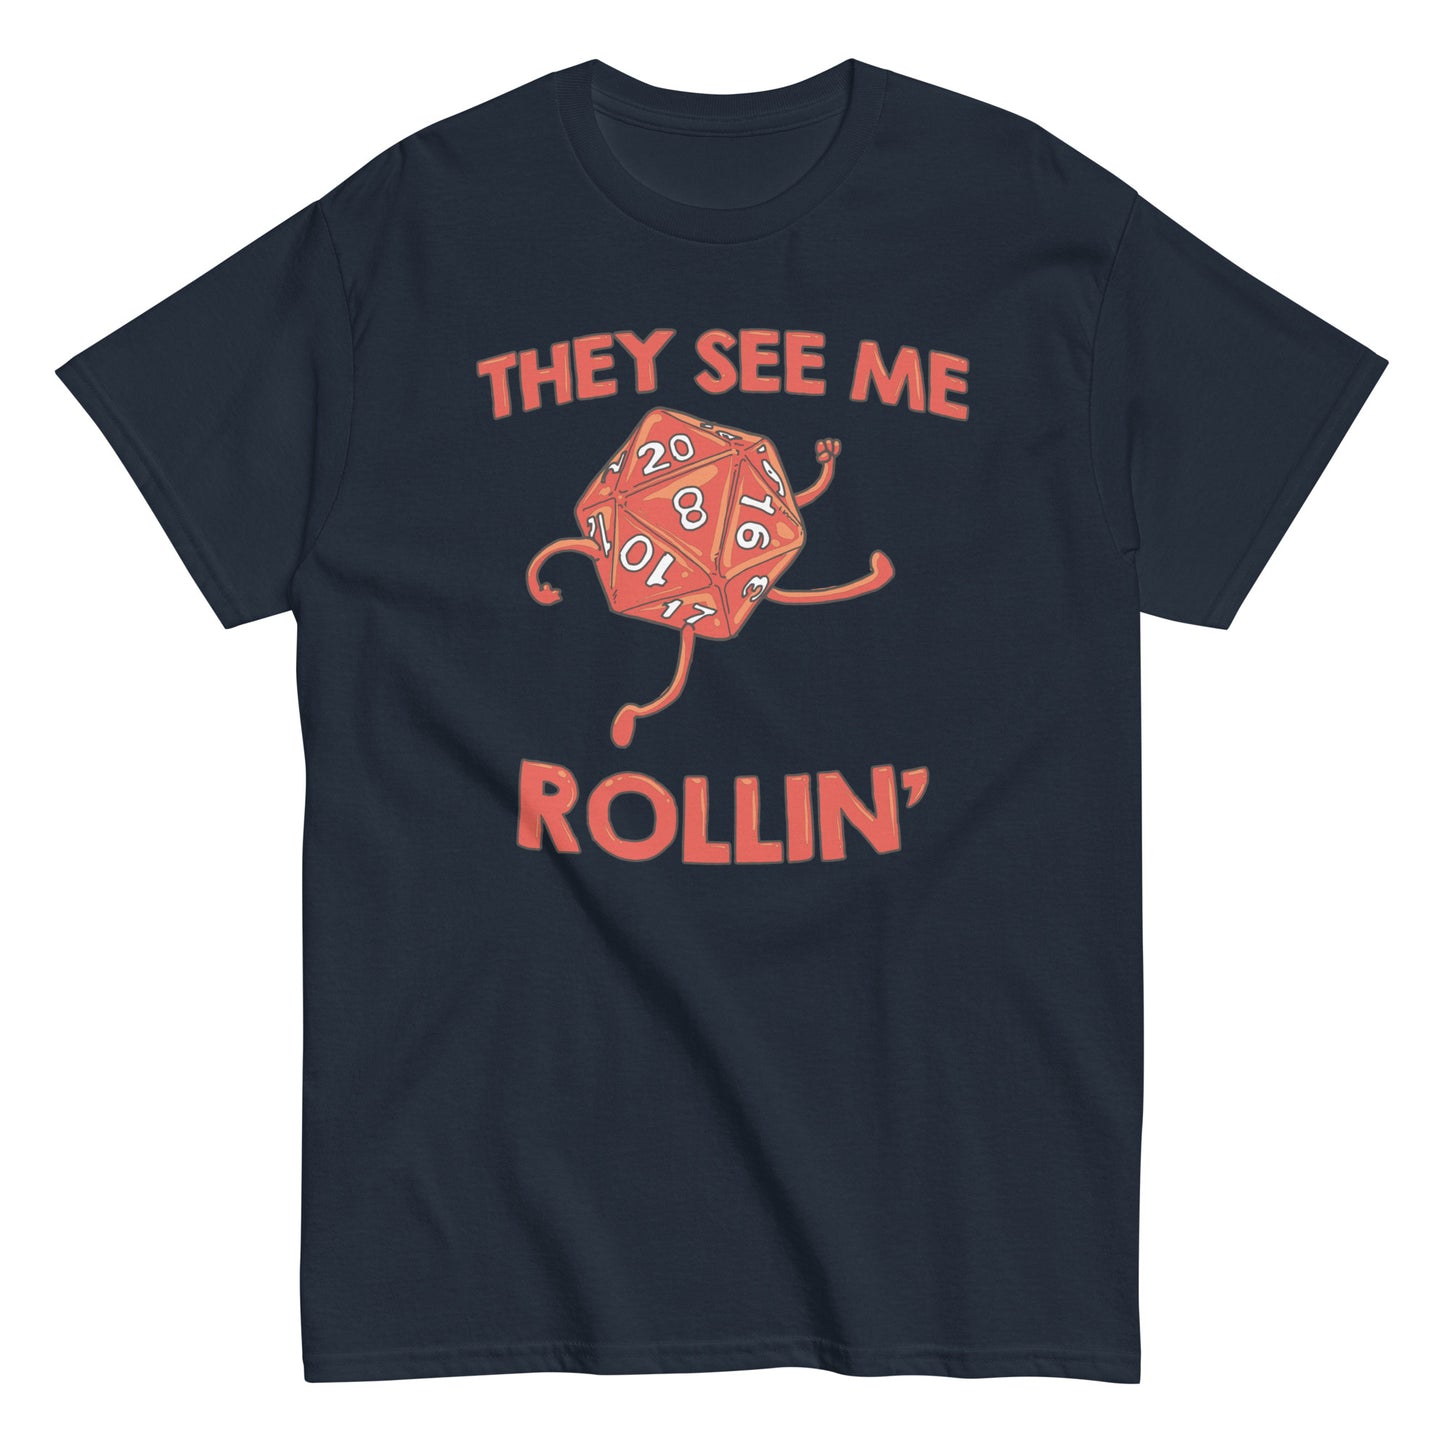 They See Me Rollin' Men's Classic Tee